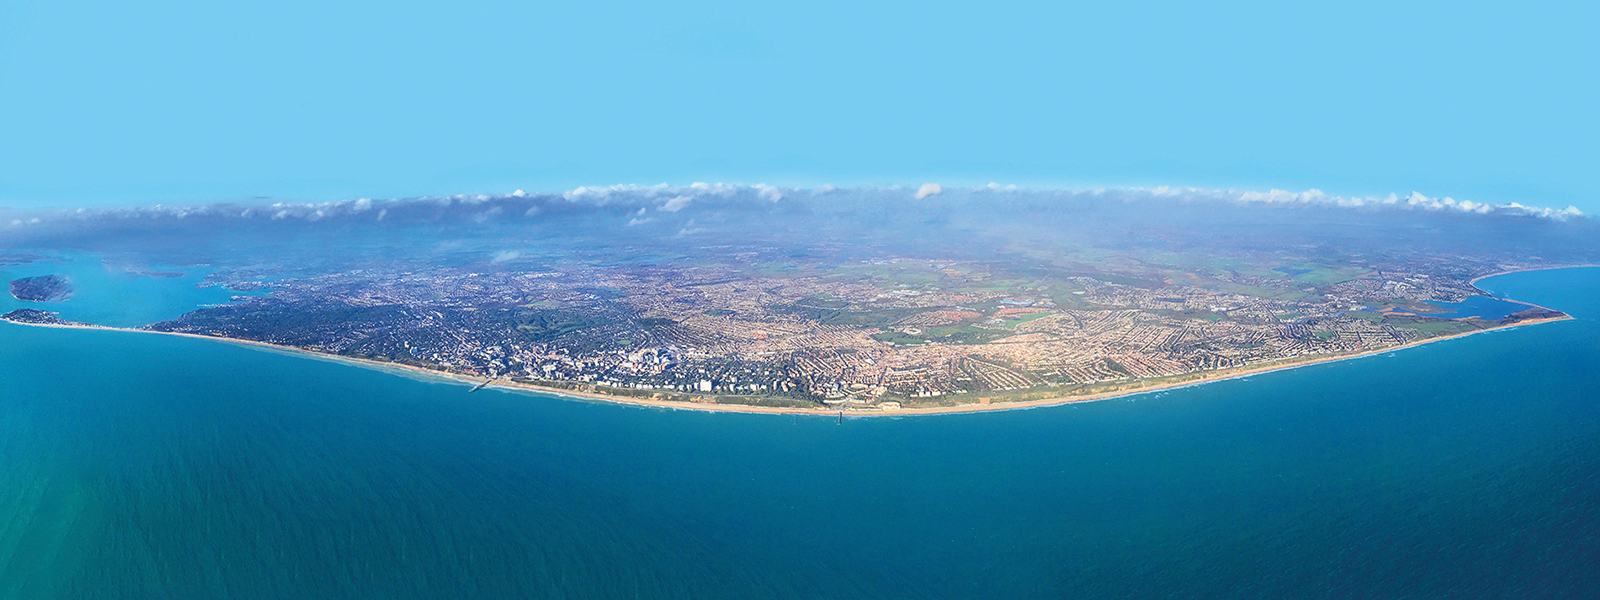 The fish eye lens view of Bournemouth, Christchurch and Poole